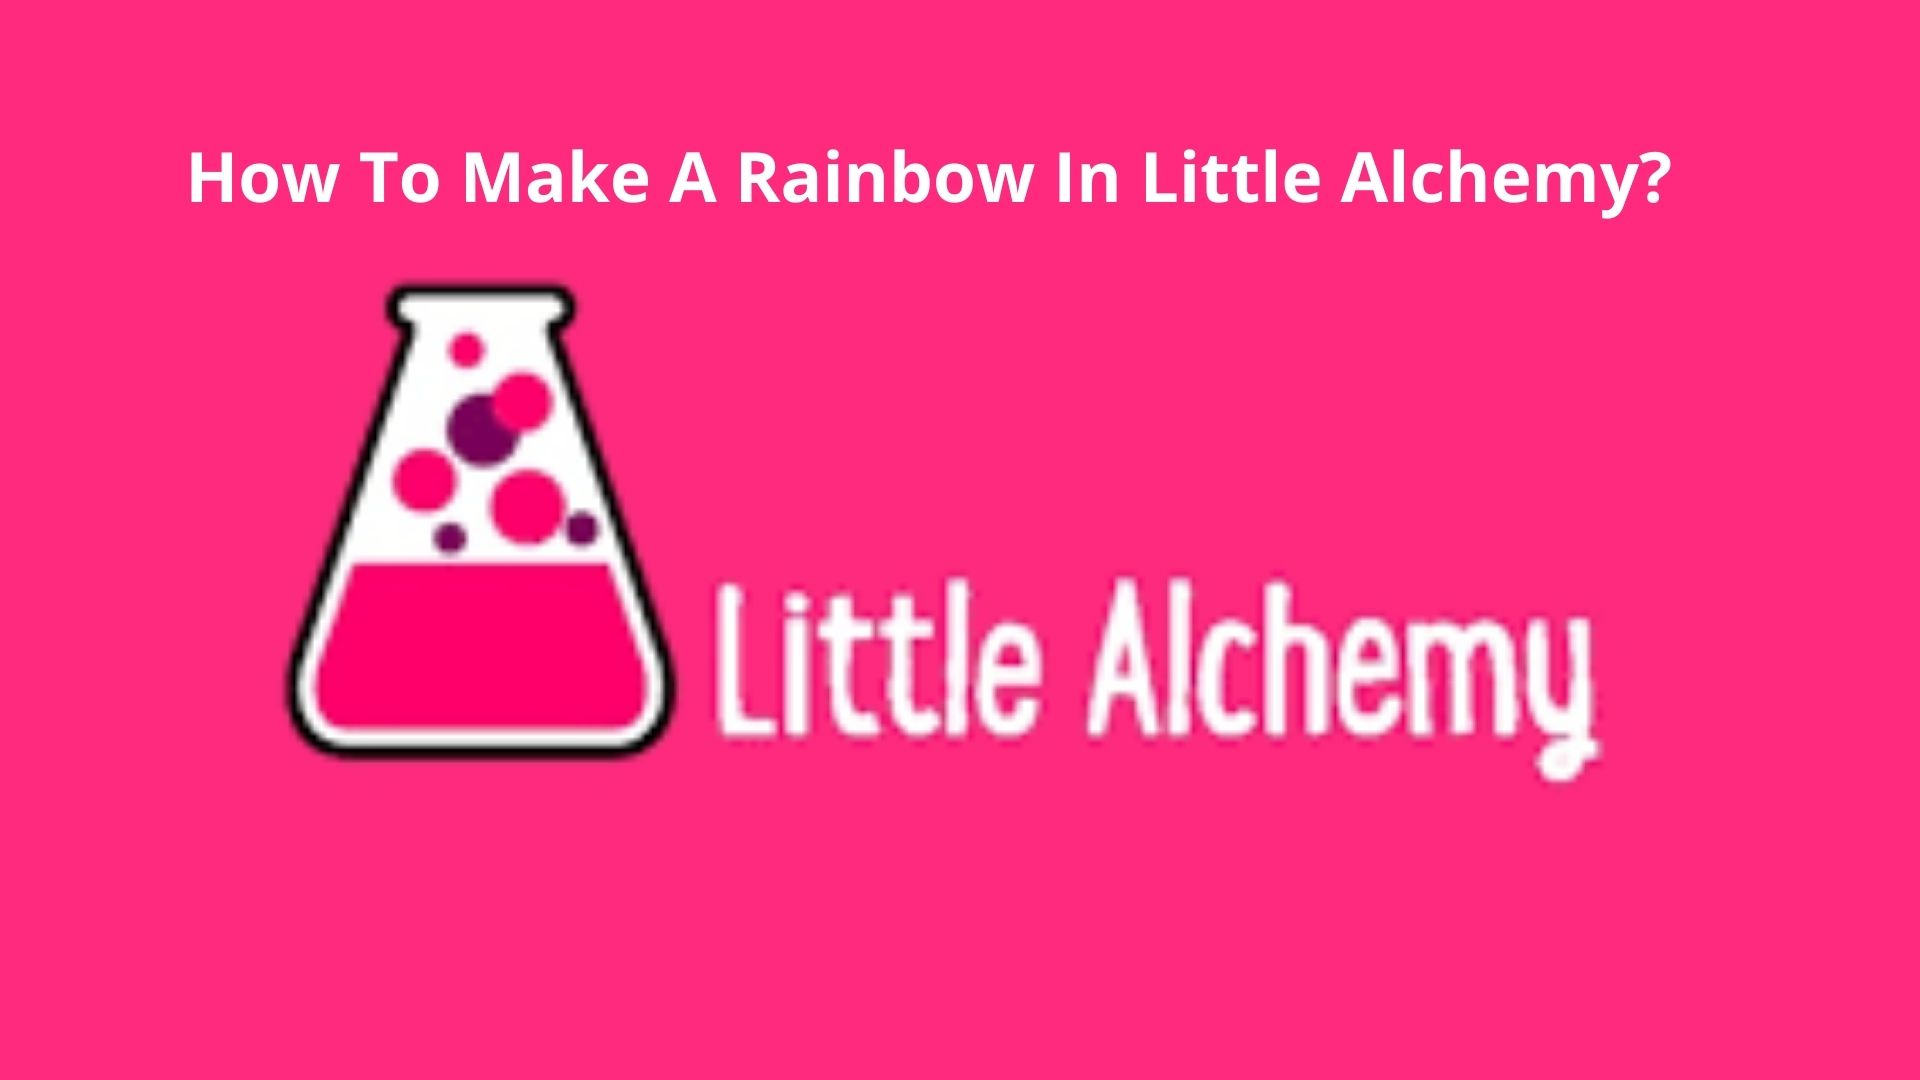 How To Make A Rainbow In Little Alchemy